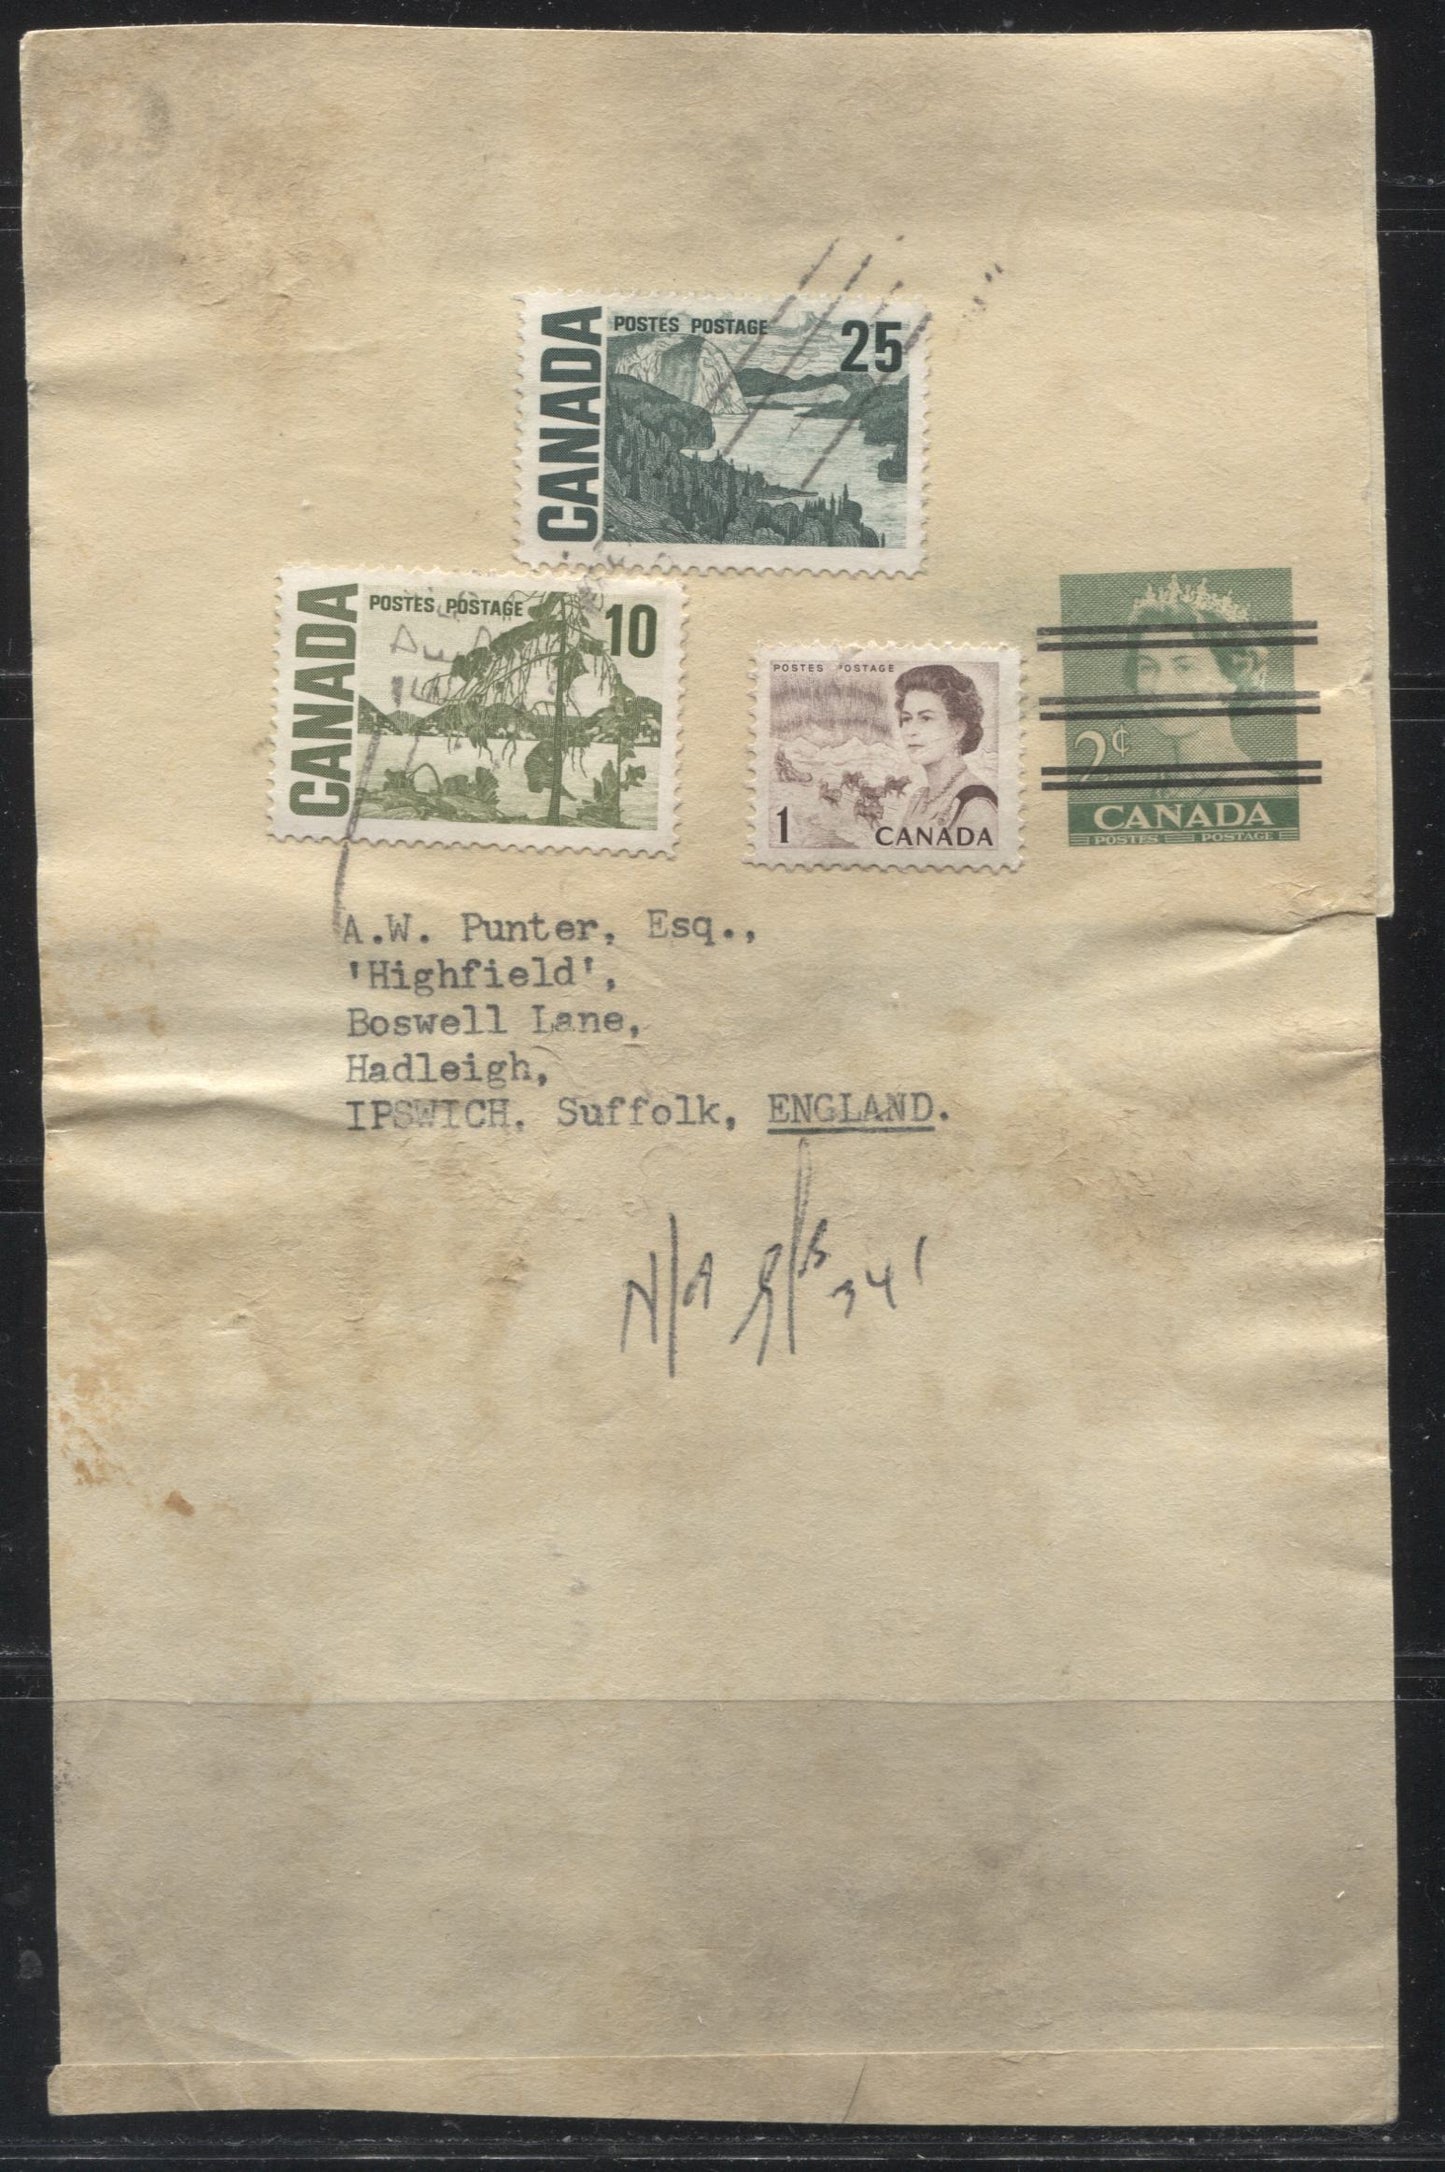 Lot 153 Canada #454, 462, 465 1c Brown, 10c Olive Green & 25c Slate Green, Northern Lights, Jack Pine & Solemn Land, 1967-1973 Centennial Issue, Combination Use on Precancelled Karsh Issue Wrapper